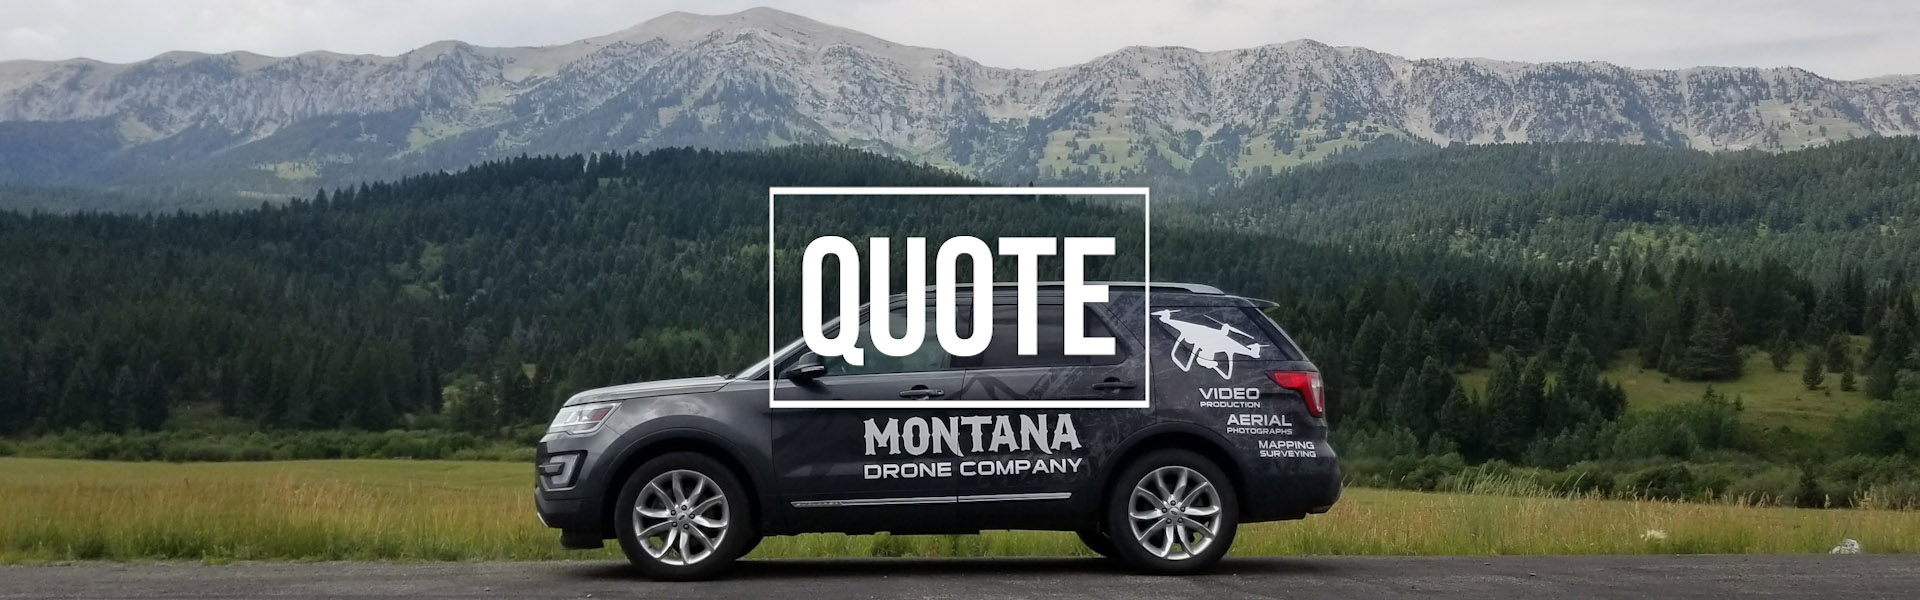 Quote Montana Professional Services